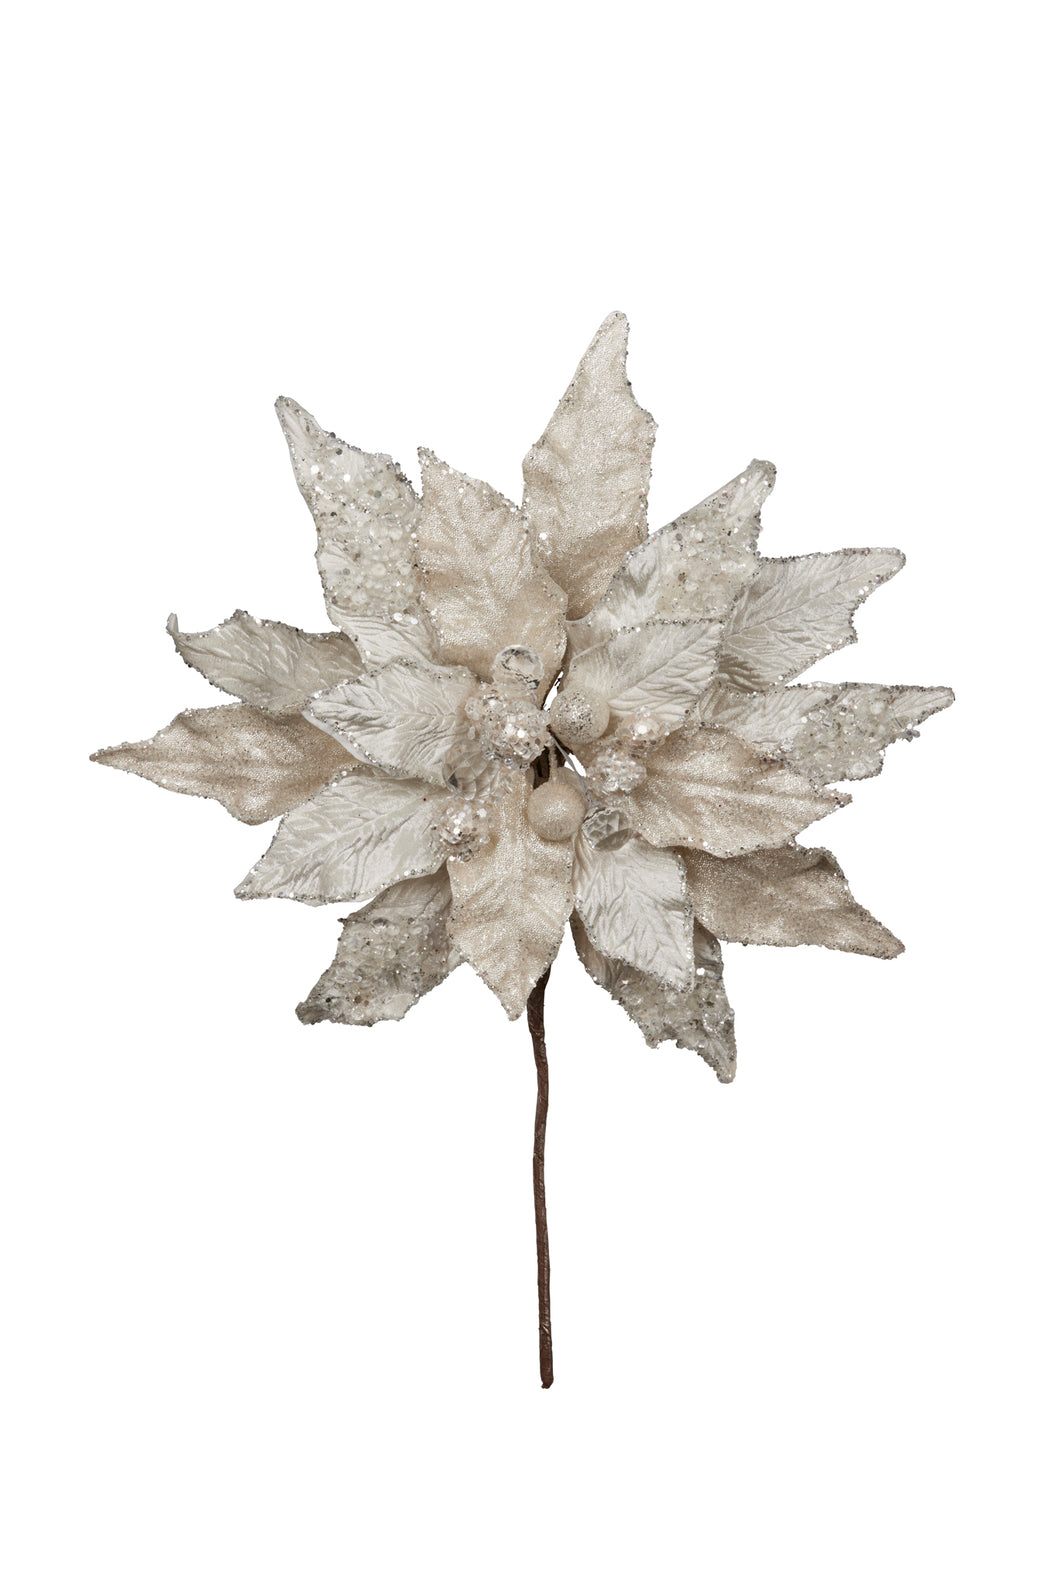 FL89 - 36cm Icy Pearl Poinsettia with Short Stem Clip (7257922830402)